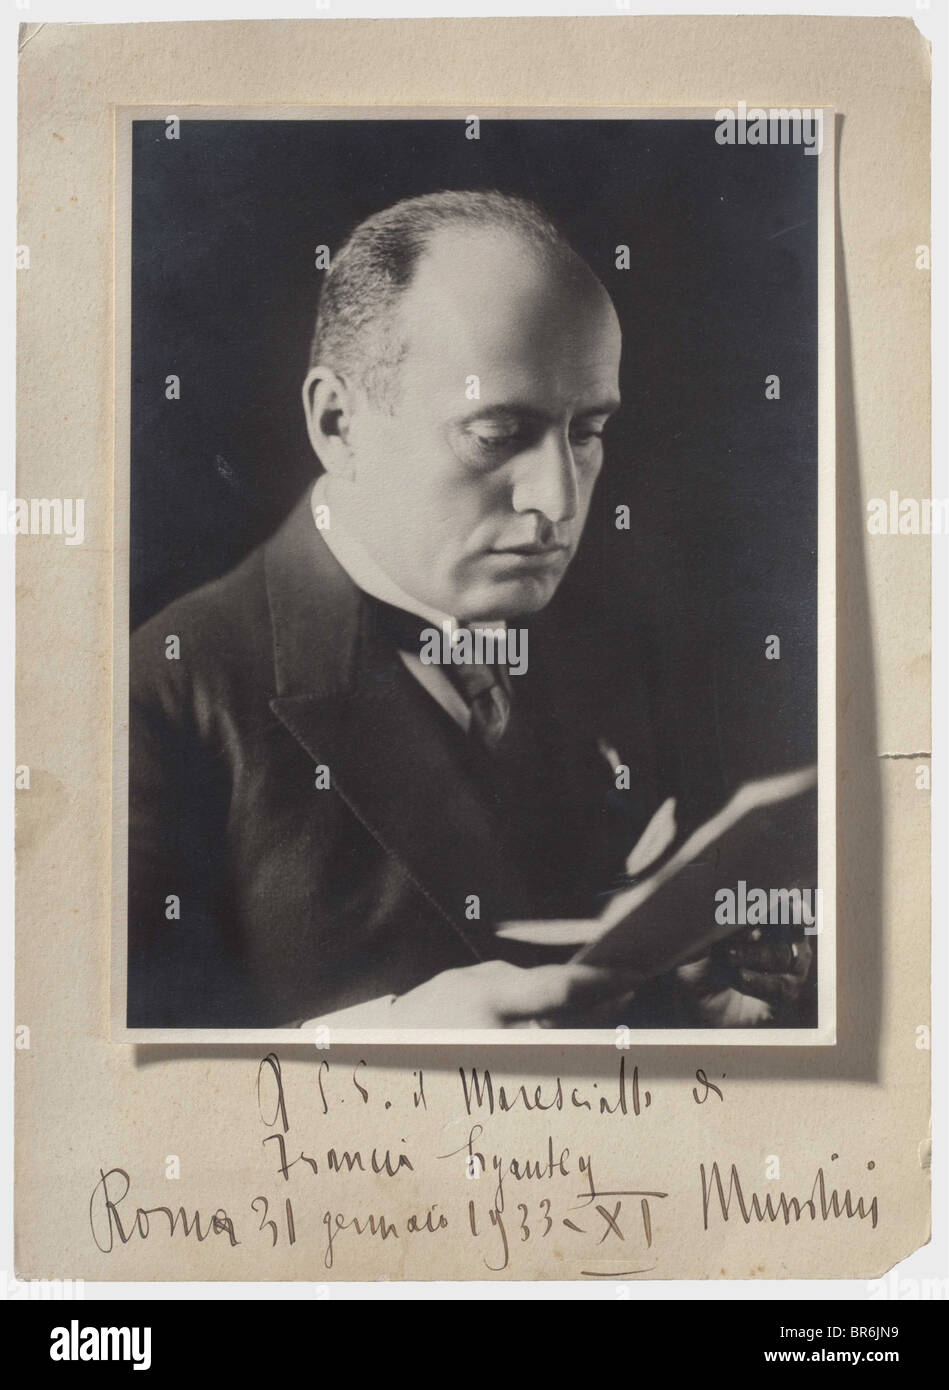 Field Marshal Hubert Lyautey (1854 - 1934) - a presentation photograph of Benito Mussolini with a personal dedication, A.s.e. il Maresciallo di Francia Lyautey Roma 31 gennaio 1933. XI Mussolini (To His Excellency Marshal of France Lyautey Rome 31 January 1933 XI Mussolini) in ink. Black & white photograph, dimensions 23 x 18 cm, on passpartout 32 x 23 cm. Lyautey, famous French Field Marshal, Resident-General for Morocco, and a well-known personality in colonial history. historic, historical, people, 1930s, 20th century, object, objects, stills, clipping, clip, Stock Photo